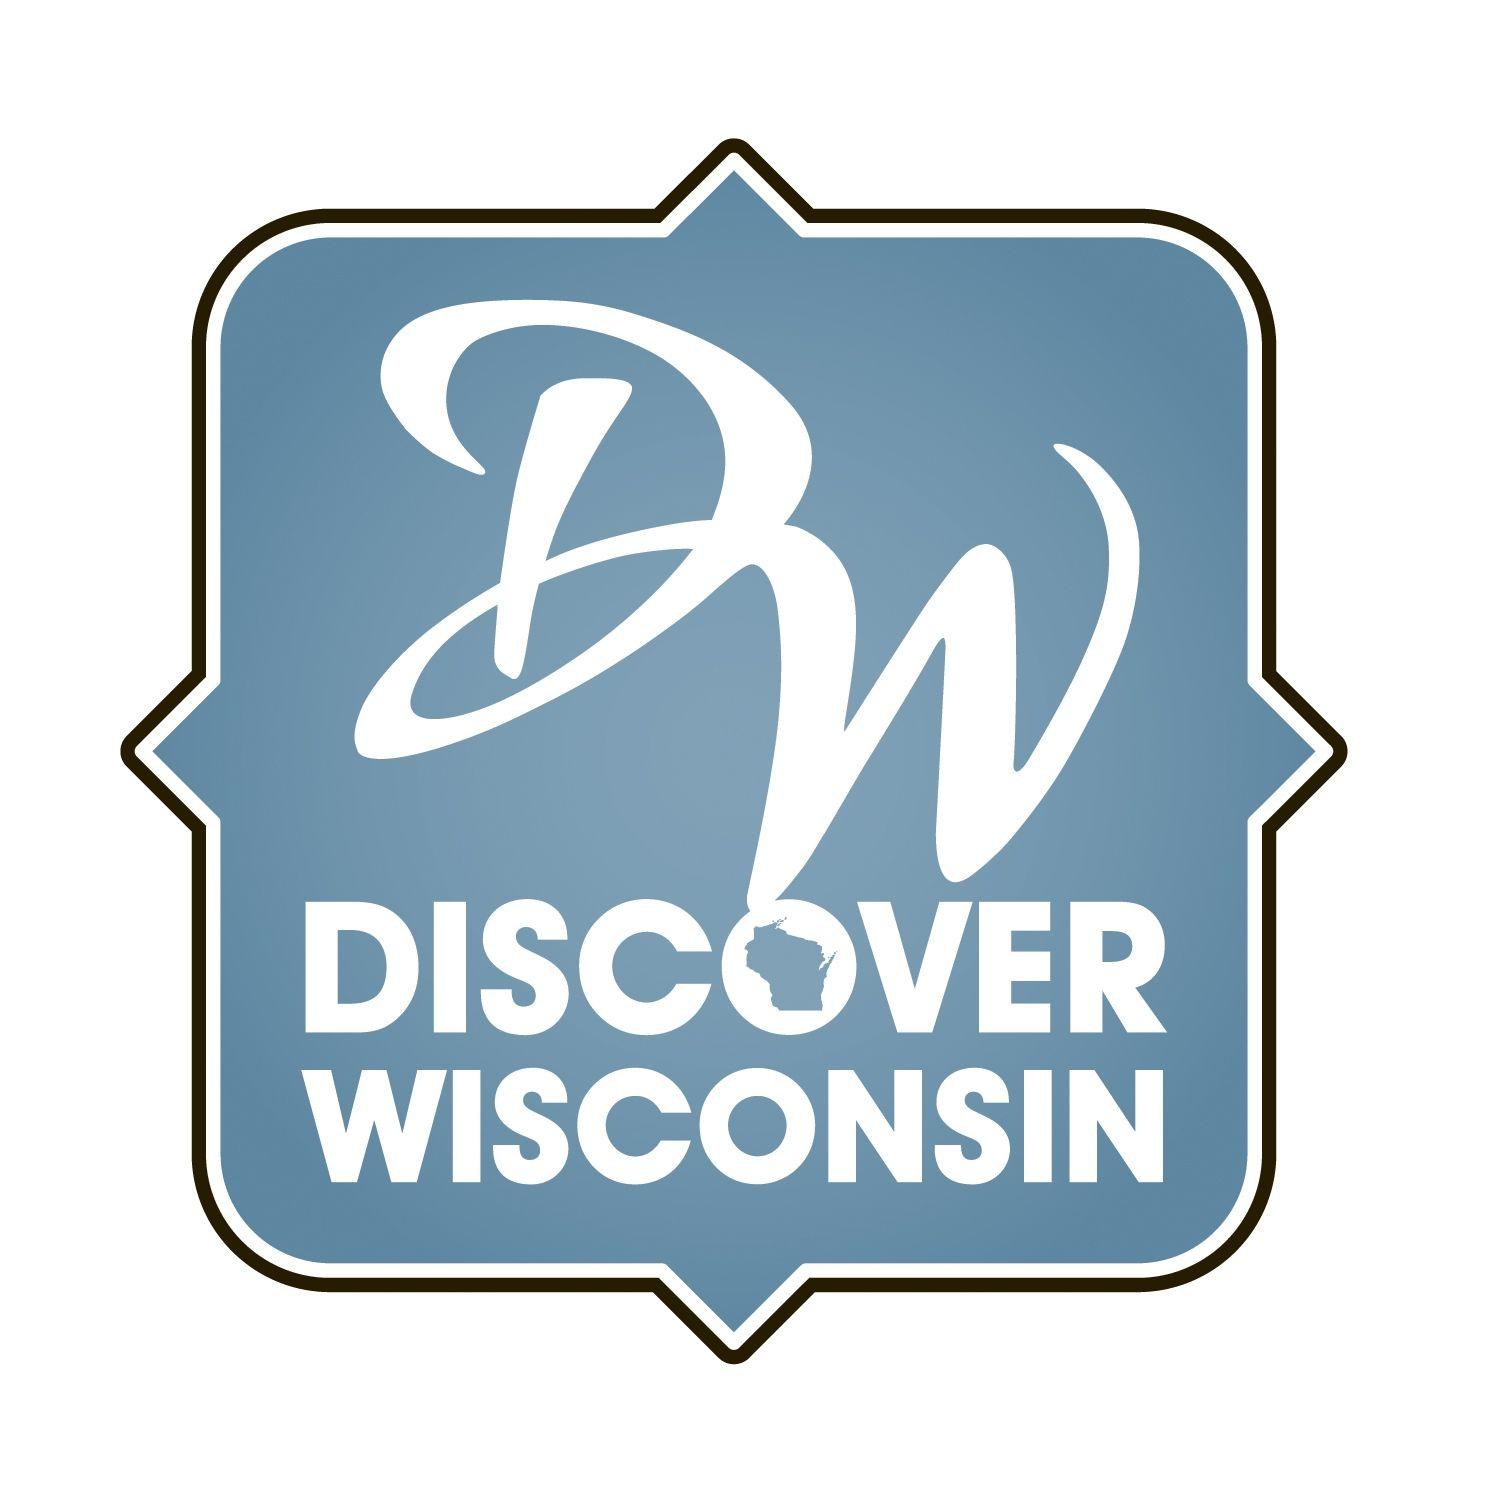 Wis Logo - Discover Wis. logo - Midwest Sports Publishing Network, Inc.